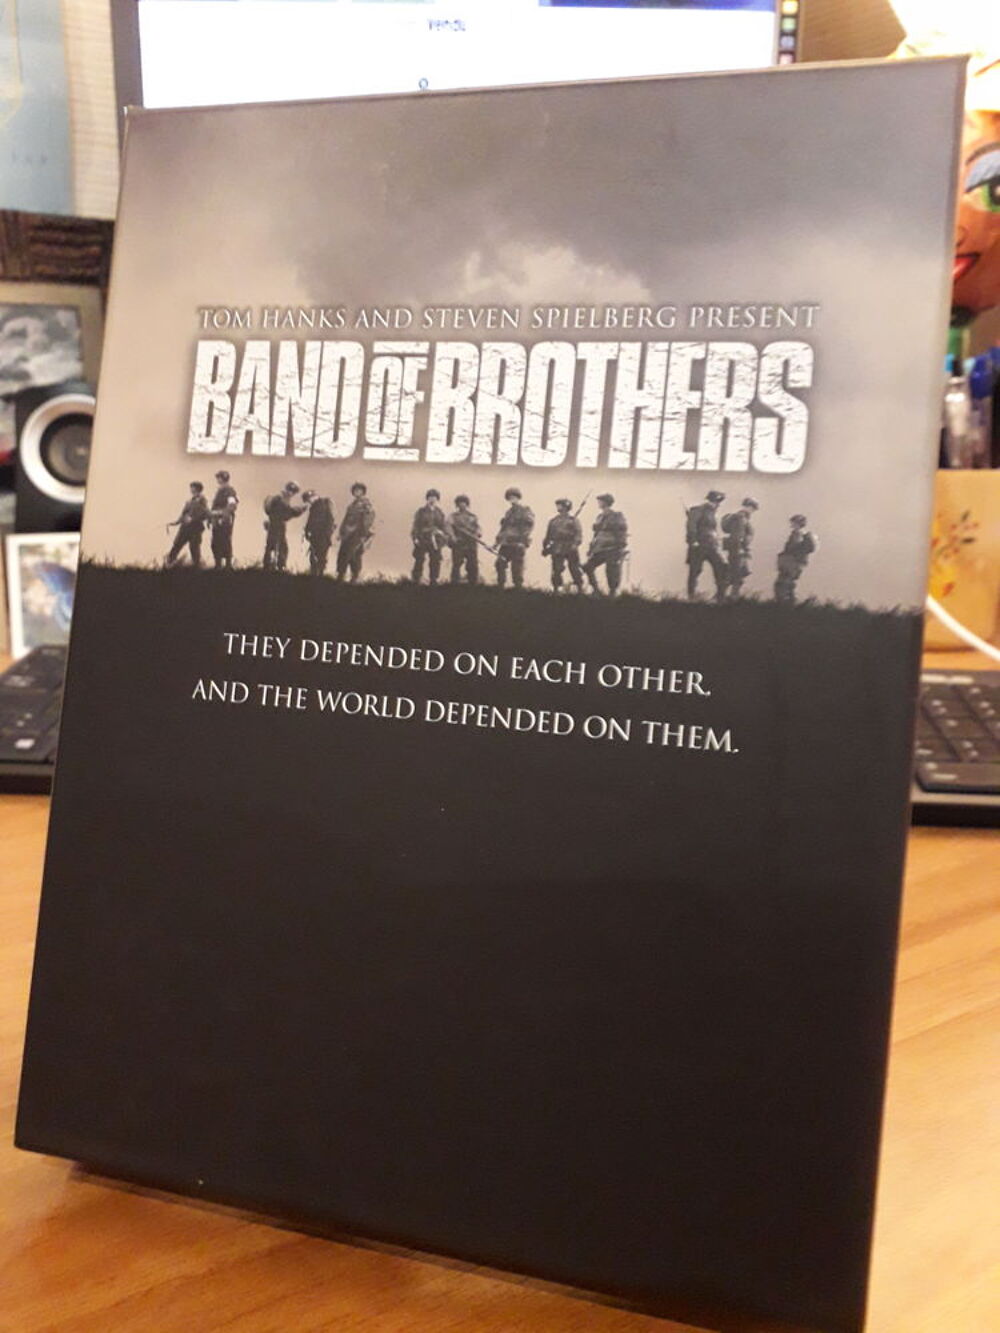 SERIE BAND OF BROTHERS DVD et blu-ray